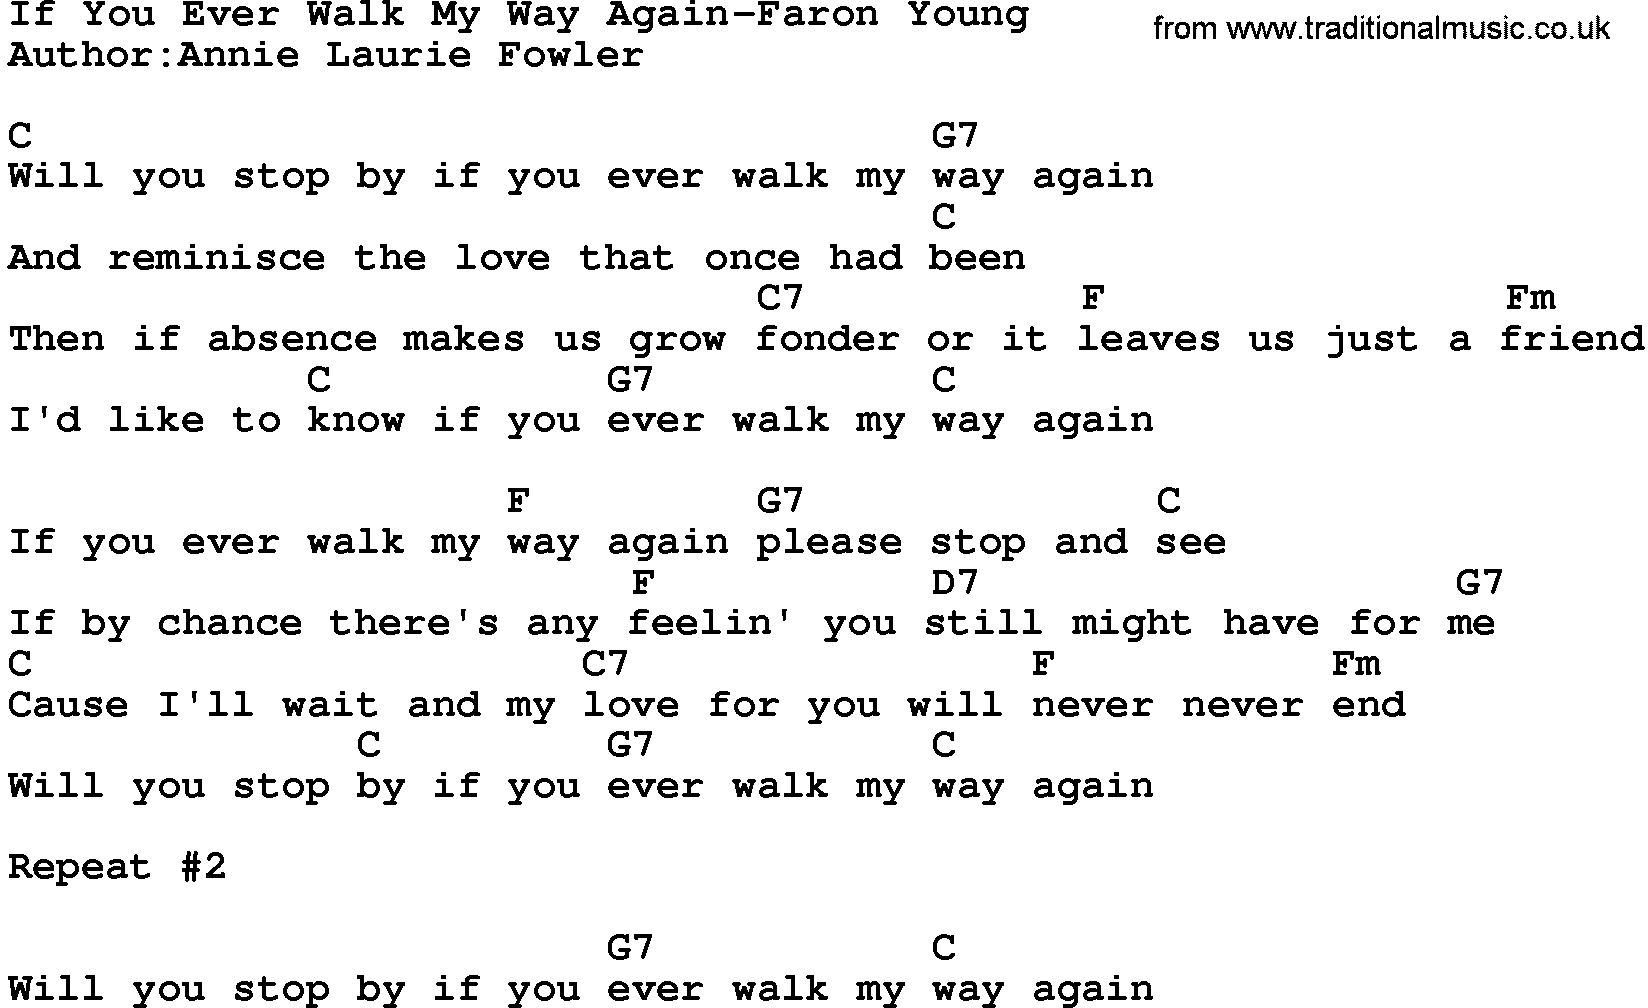 Country music song: If You Ever Walk My Way Again-Faron Young lyrics and chords